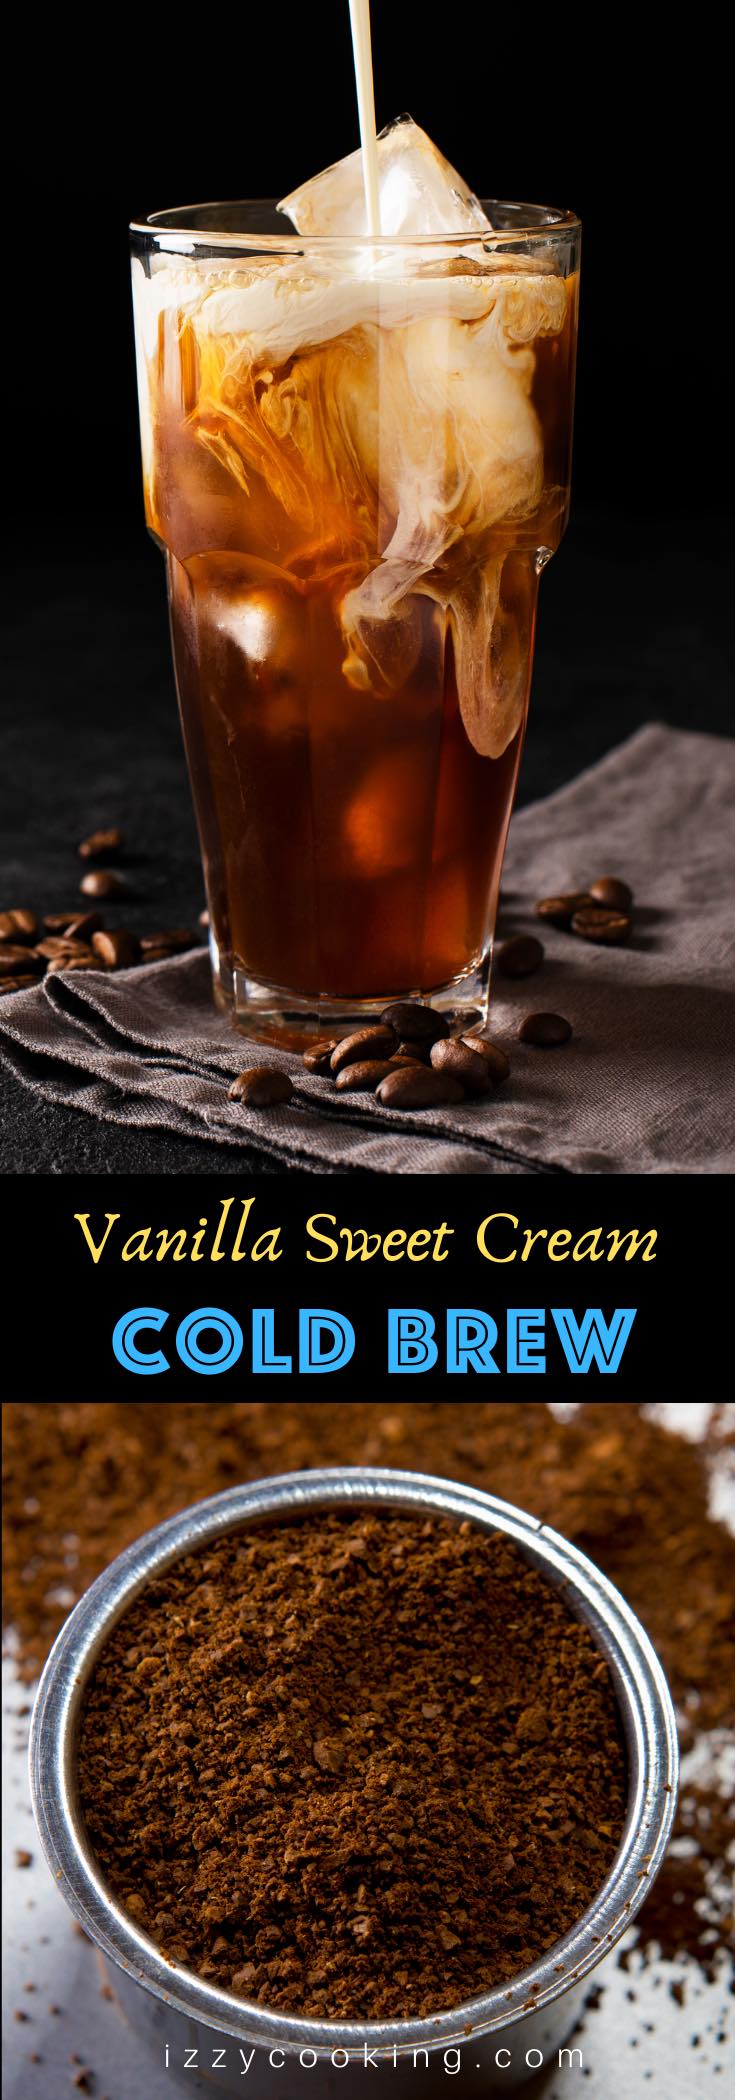 No fancy gear needed to make this Starbucks Copycat Vanilla Sweet Cream Cold Brew at home! Made with a few simple ingredients, it’s sweet, creamy, and full of iced coffee flavor. I’ll show you the correct cold brew coffee ratios and how to make the perfect vanilla sweet cream! At the fraction of the price, it’s so easy to make and you can now enjoy it regularly!